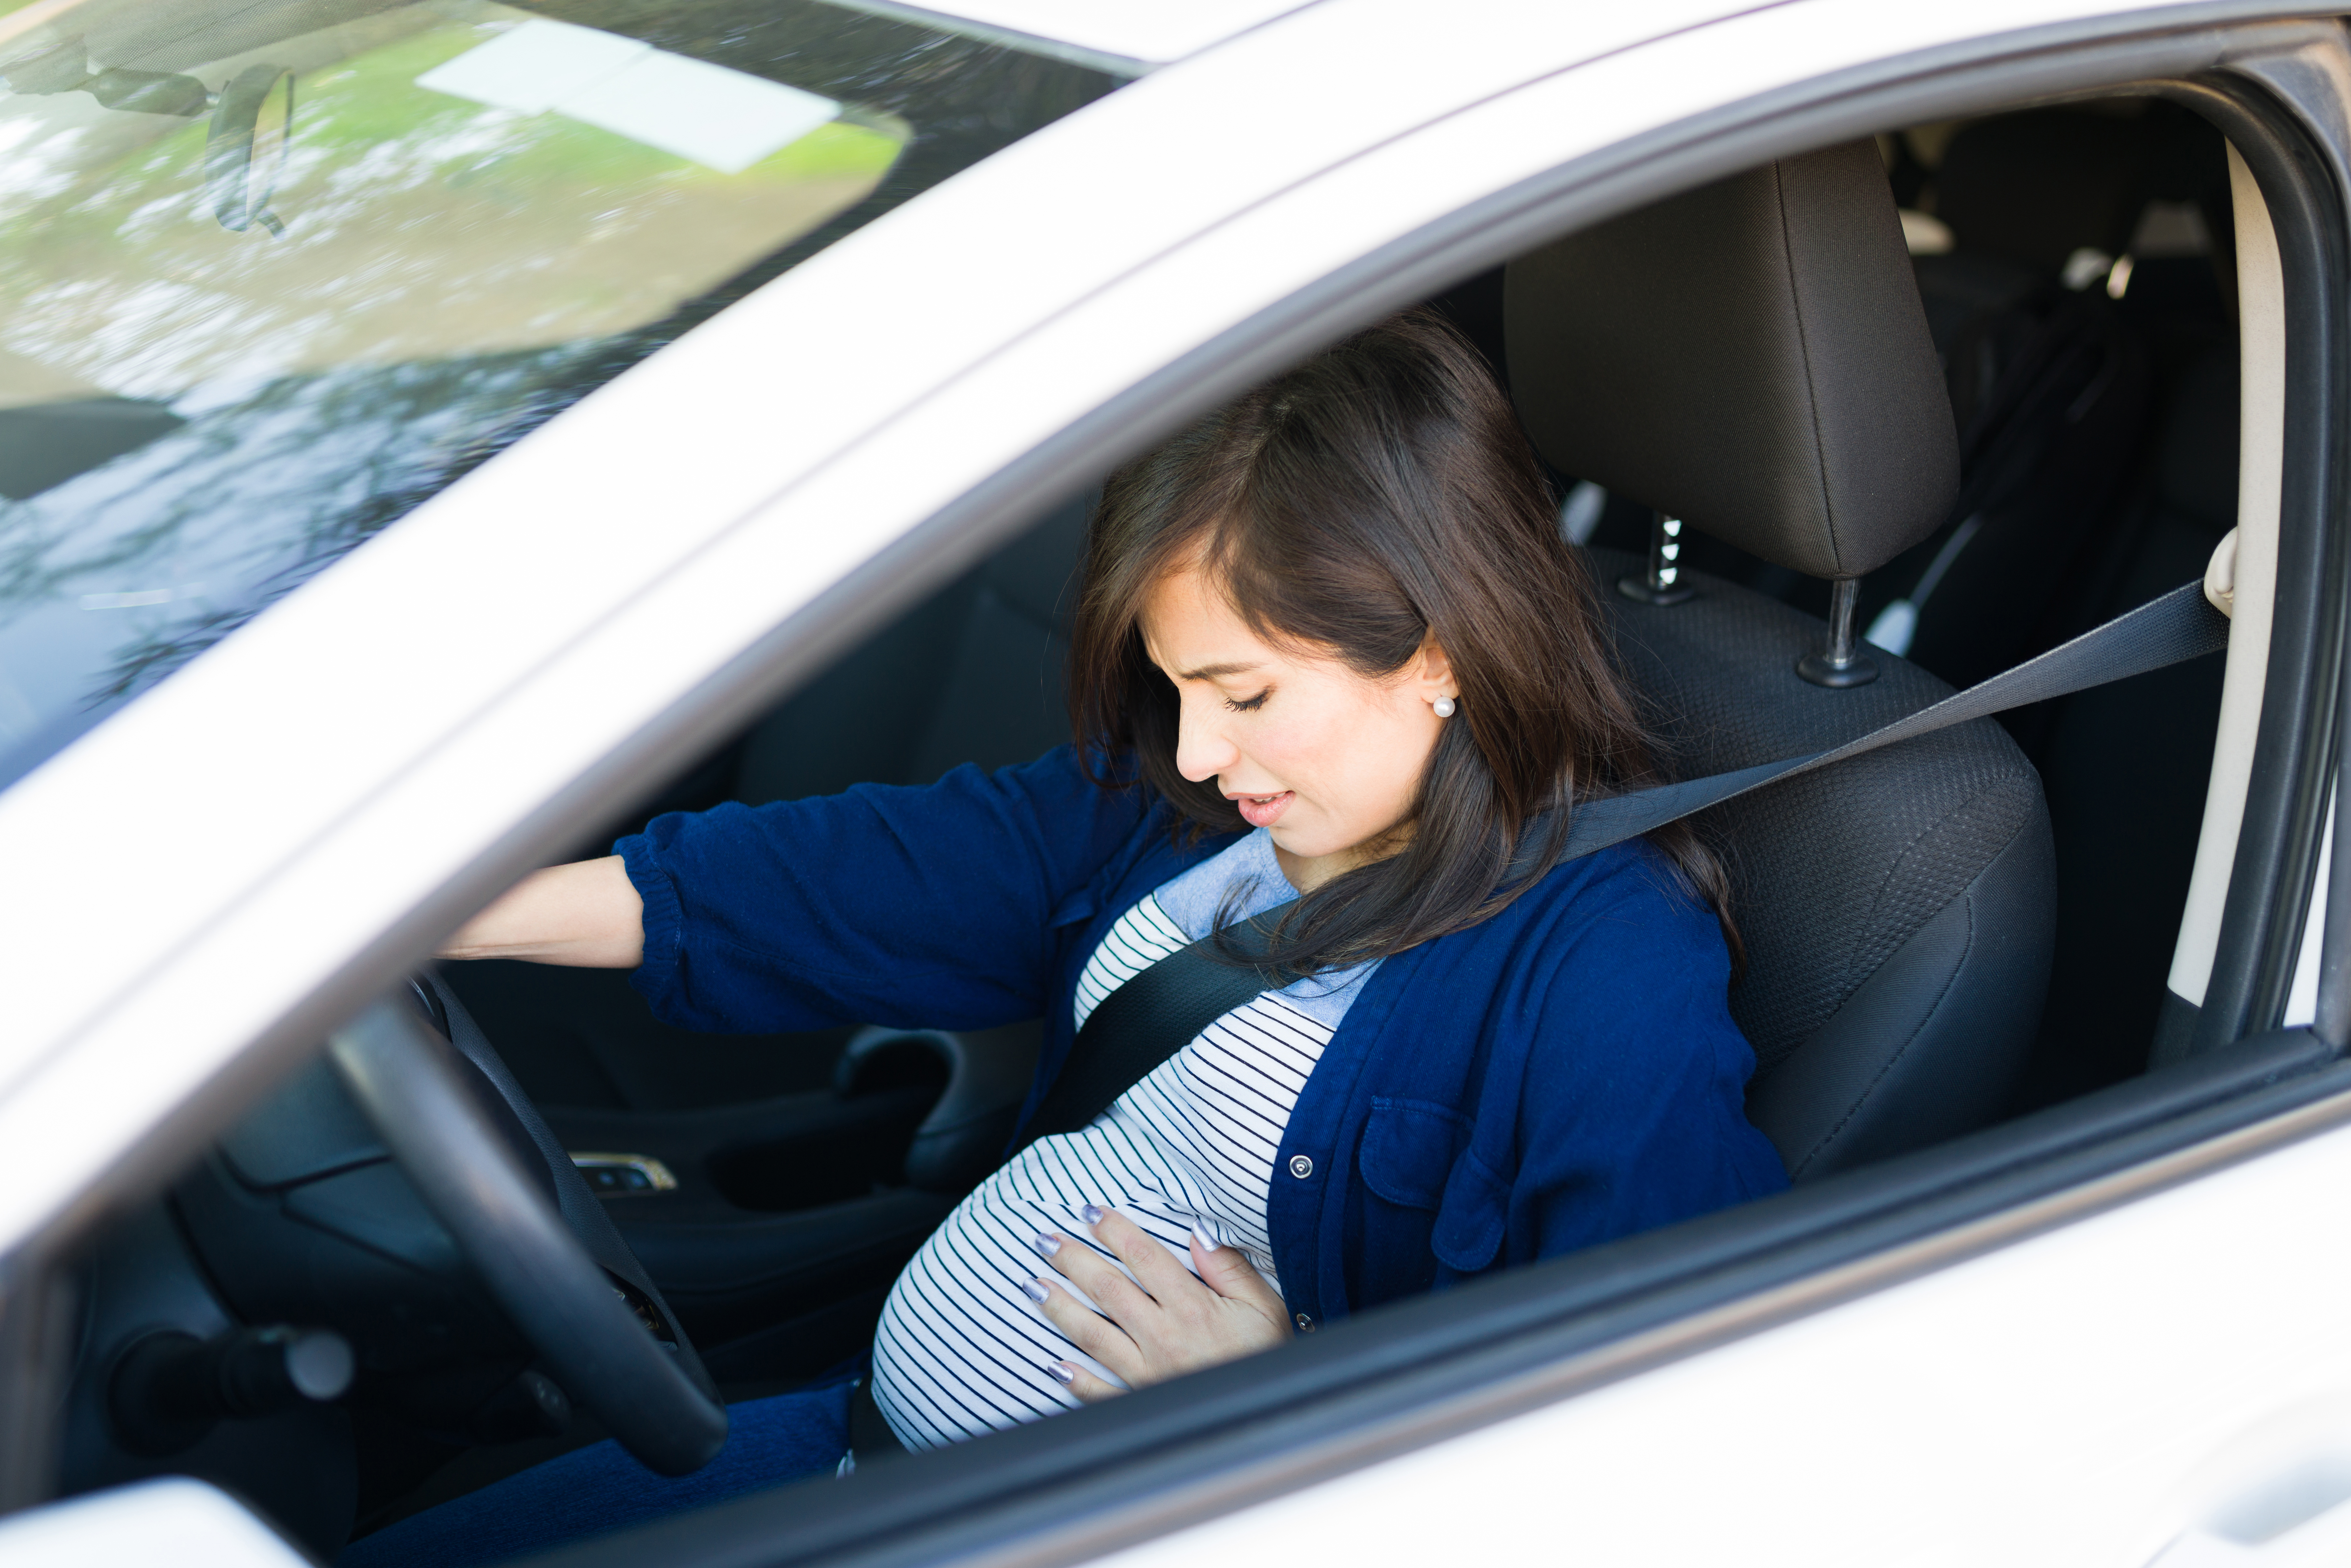 Pregnant woman in her car | Source: Getty Images